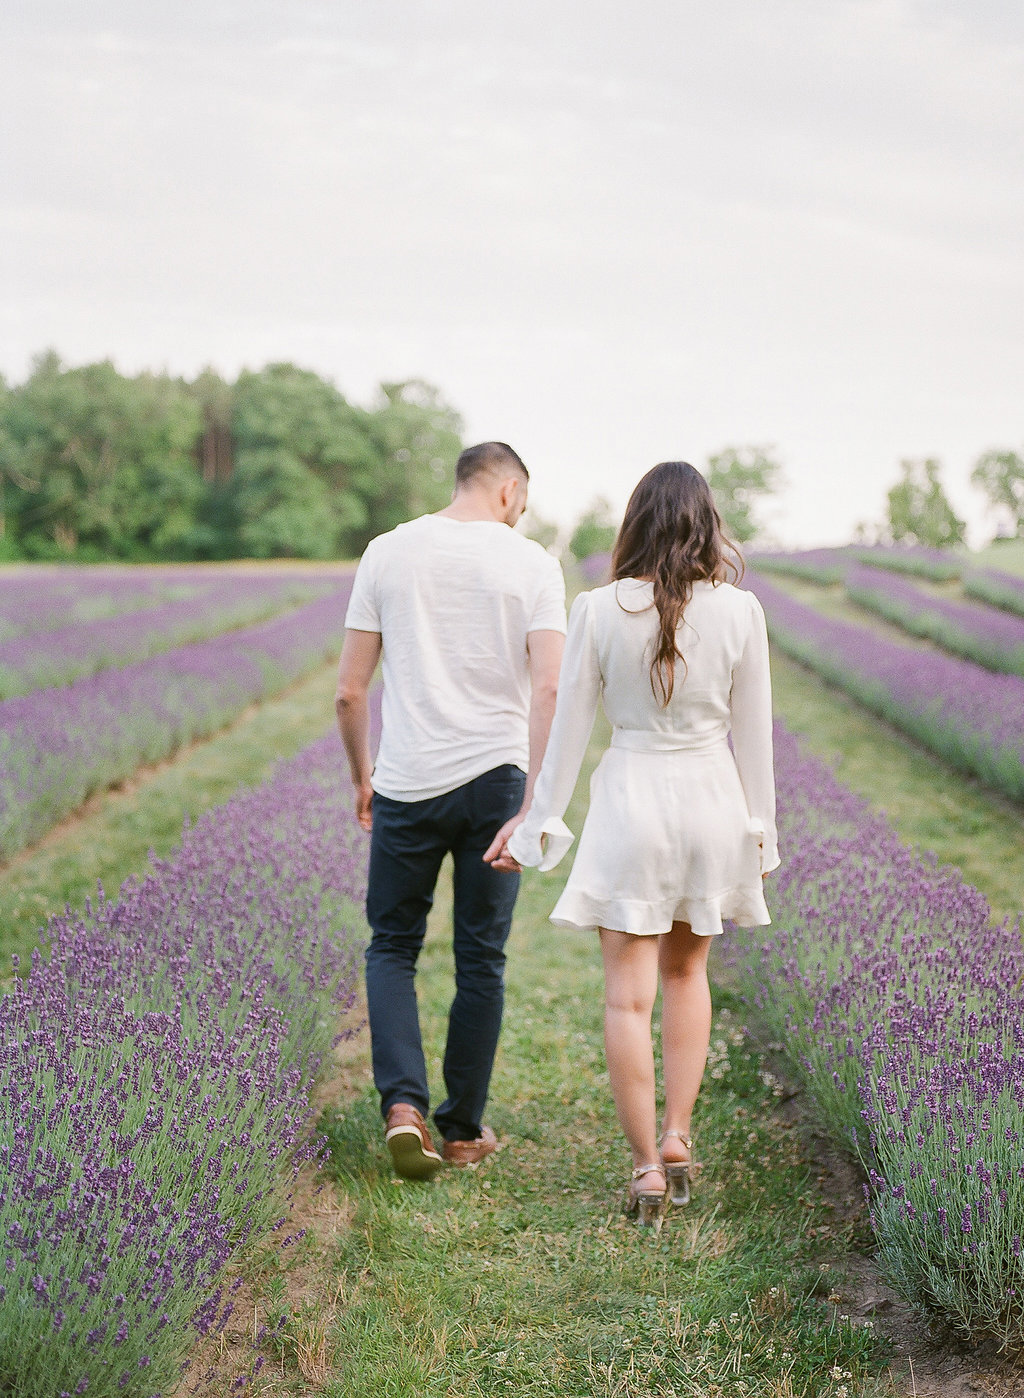 Romantic Engagement Session in a Lavender Field | Muguet Photography